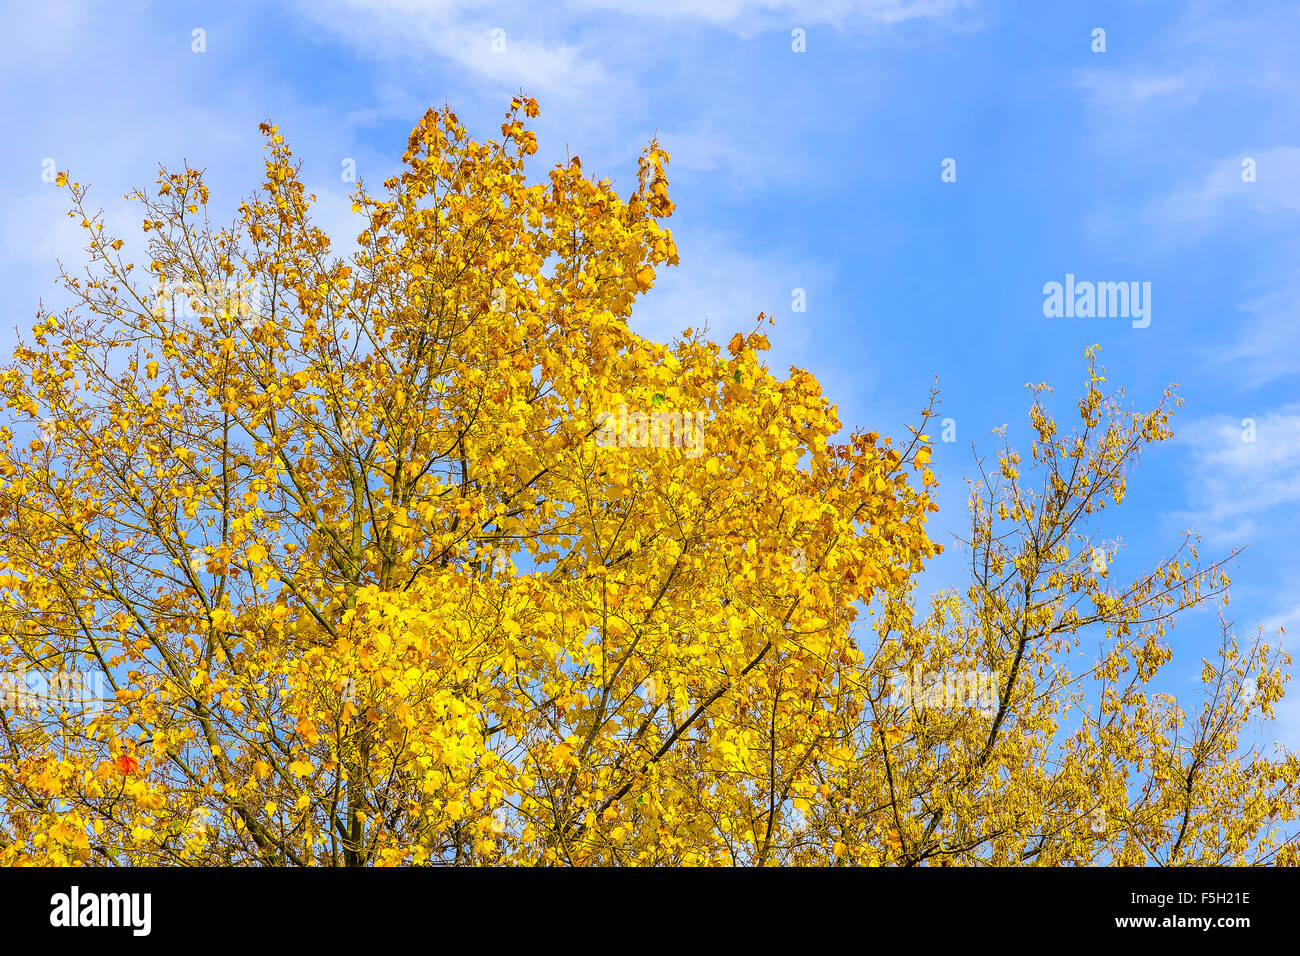 Branches with Yellow Leaves Against Sky in Autumn Season Stock Photo